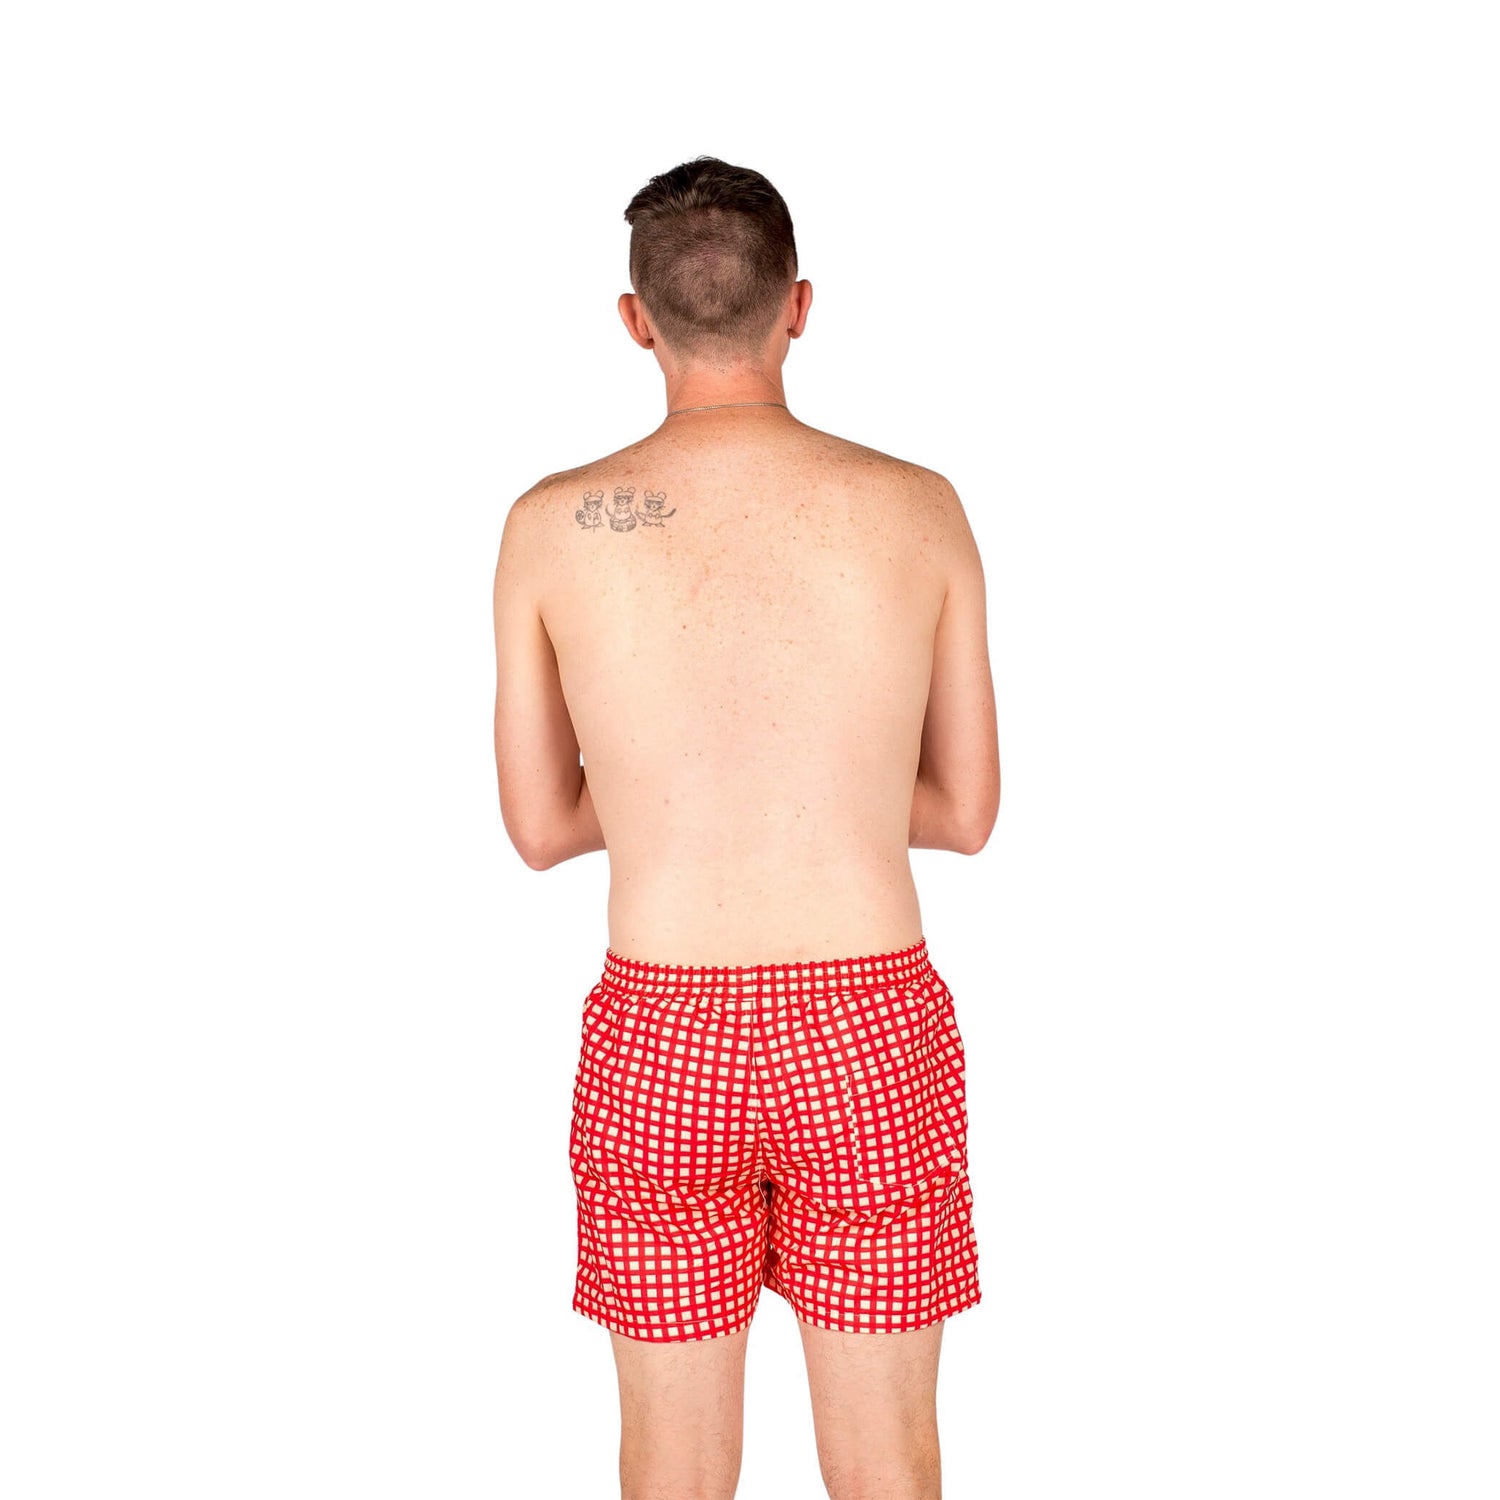 Male model facing away from the camera. He is shirtless and wearing Vibrant Hounds Red Gingham swim shorts.,